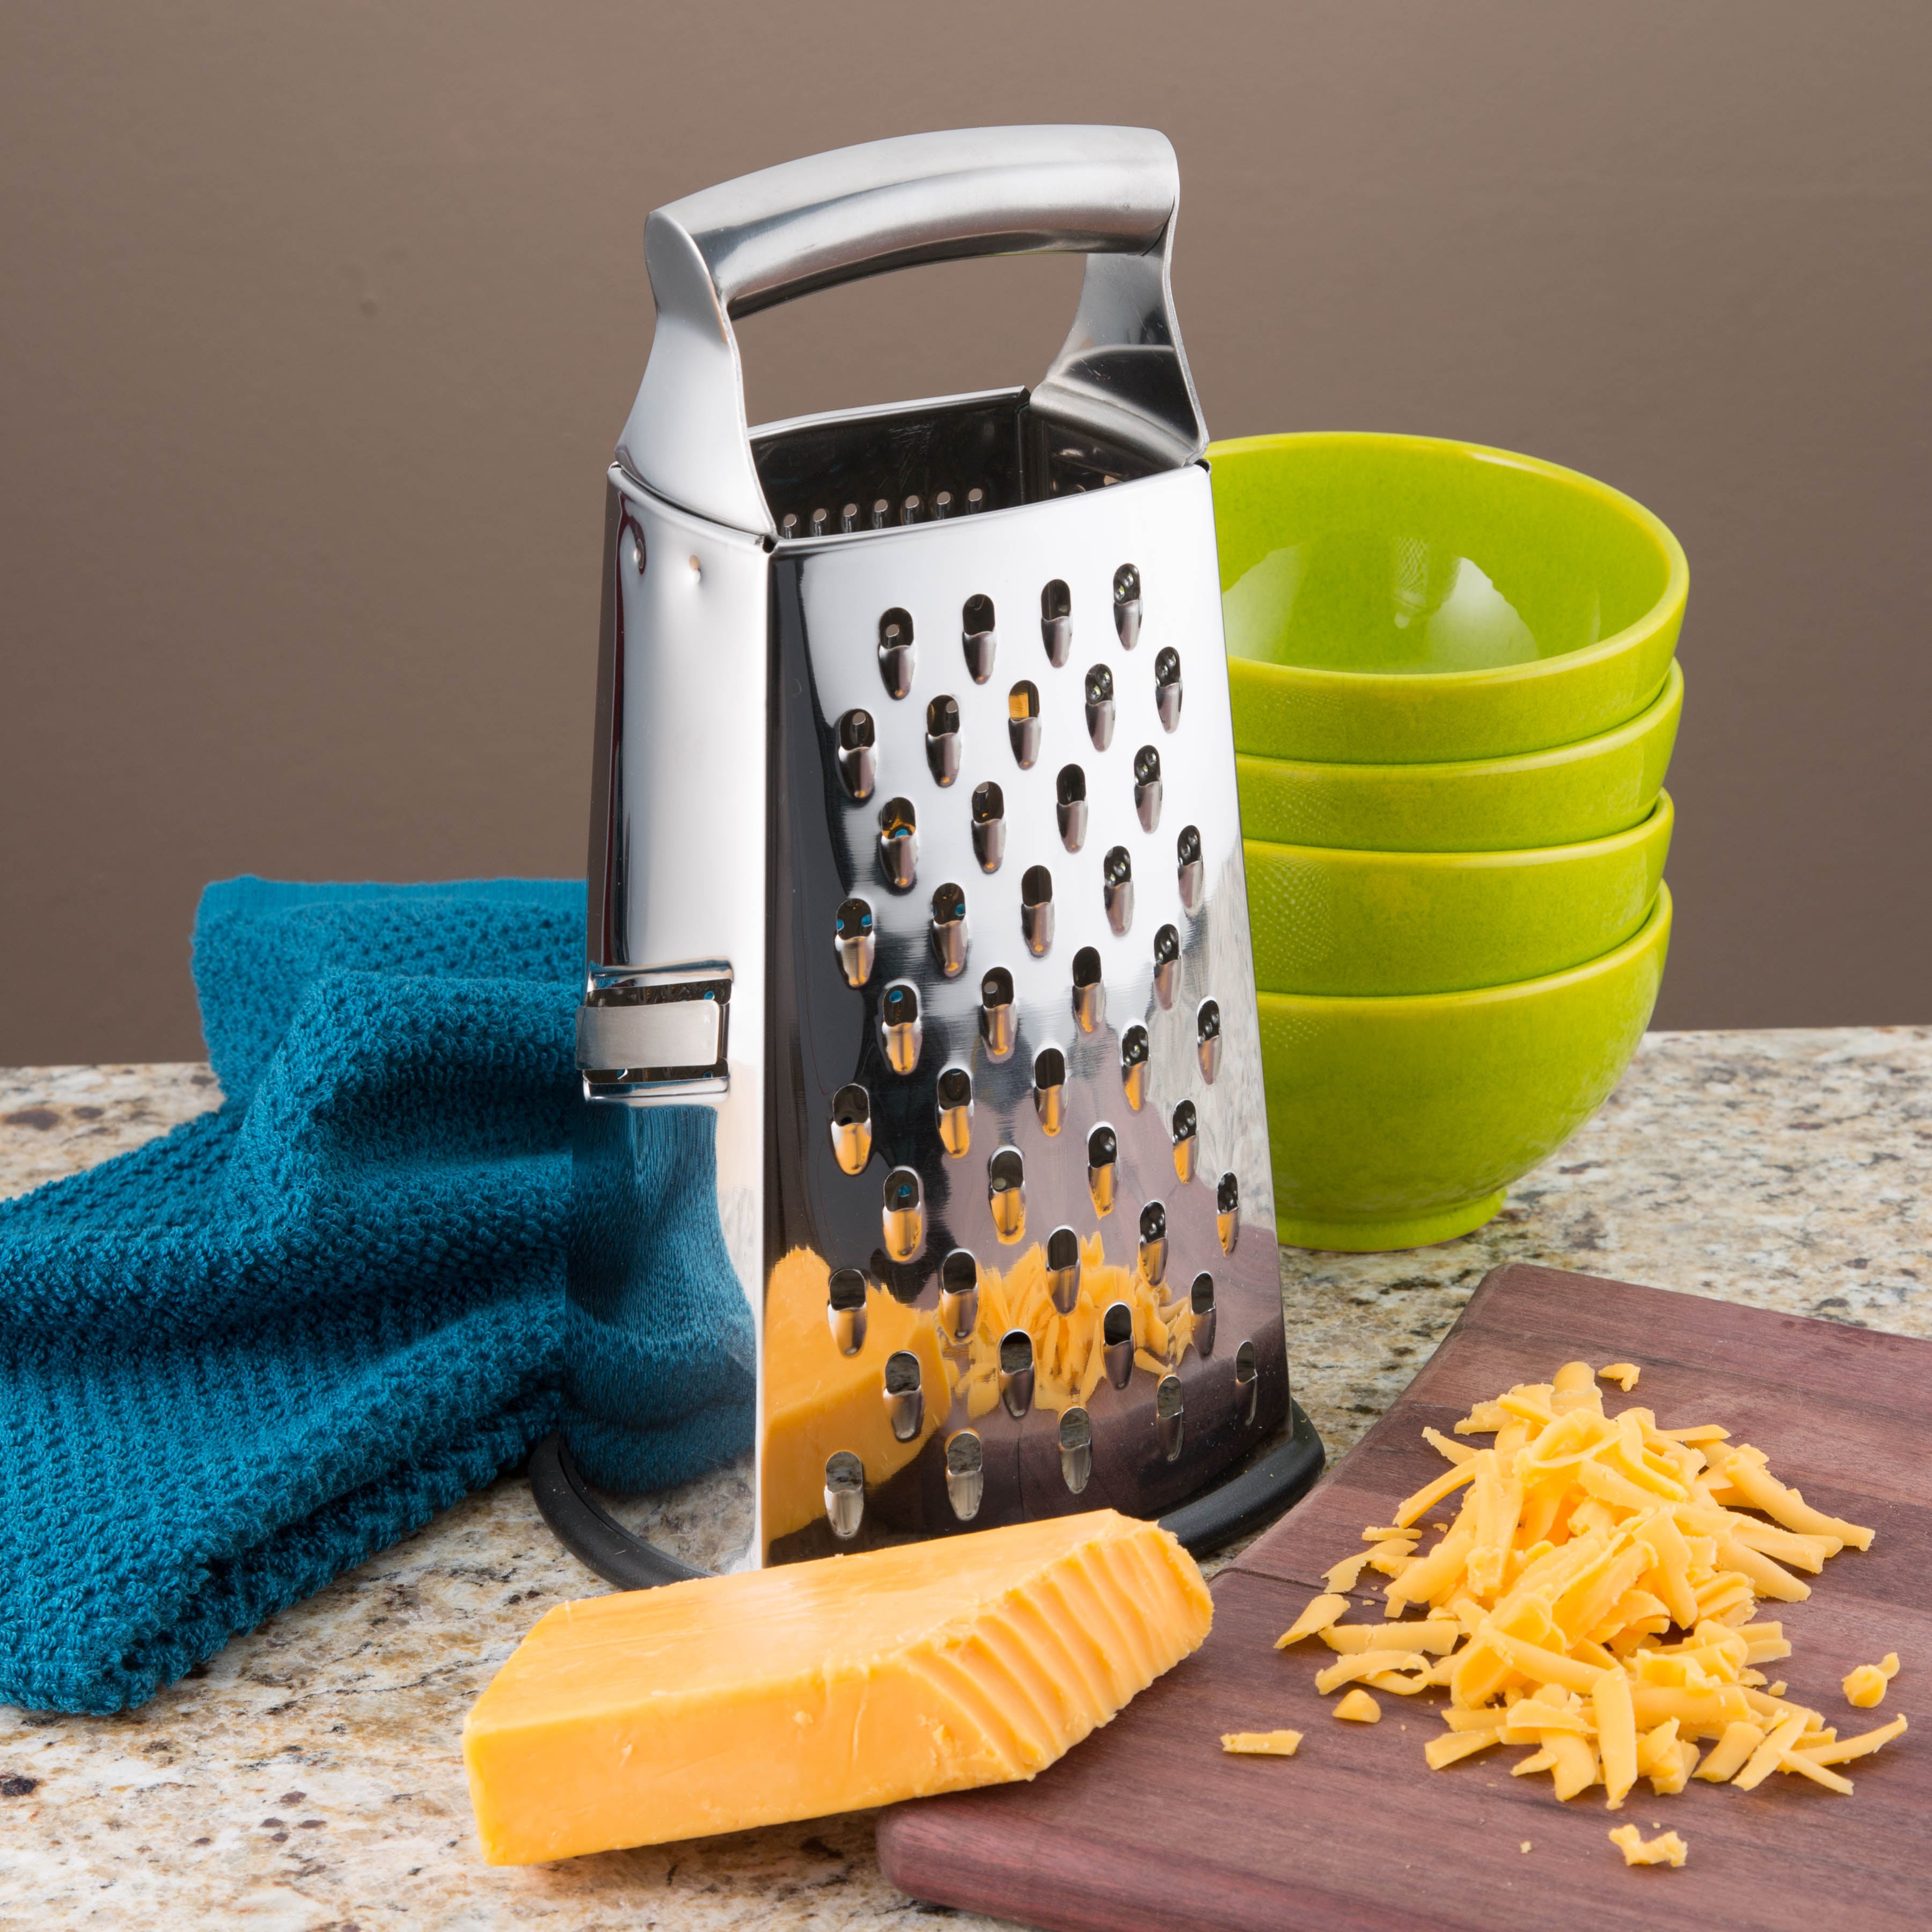 Spring Chef Professional 4 Sided Cheese Grater, Stainless Steel with Soft  Grip Handle, Handheld Kitchen Food Shredder Best Box Grater for Parmesan